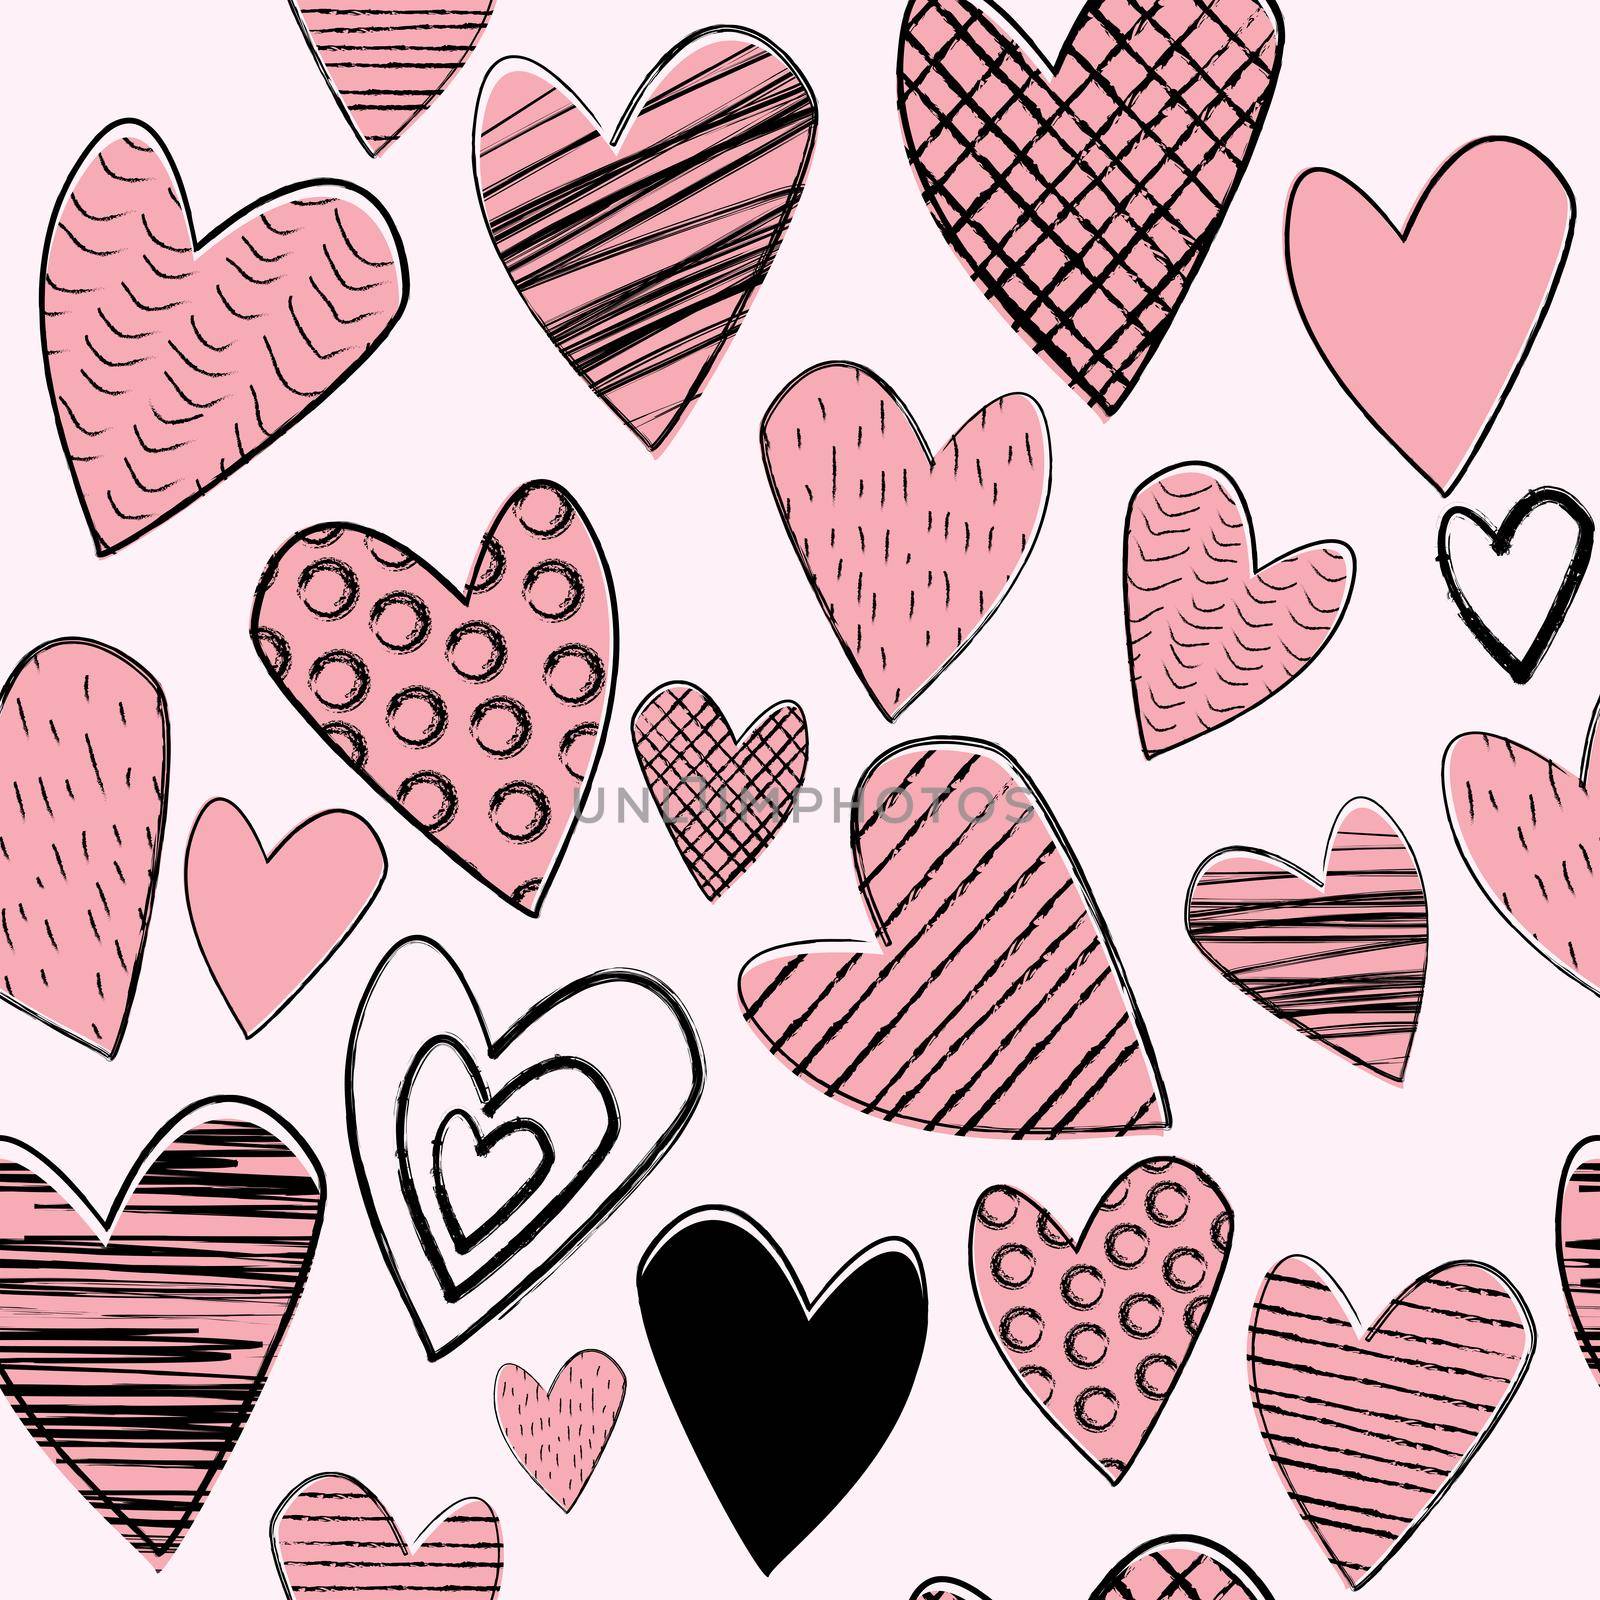 Doodle pink hearts seamless background by hibrida13